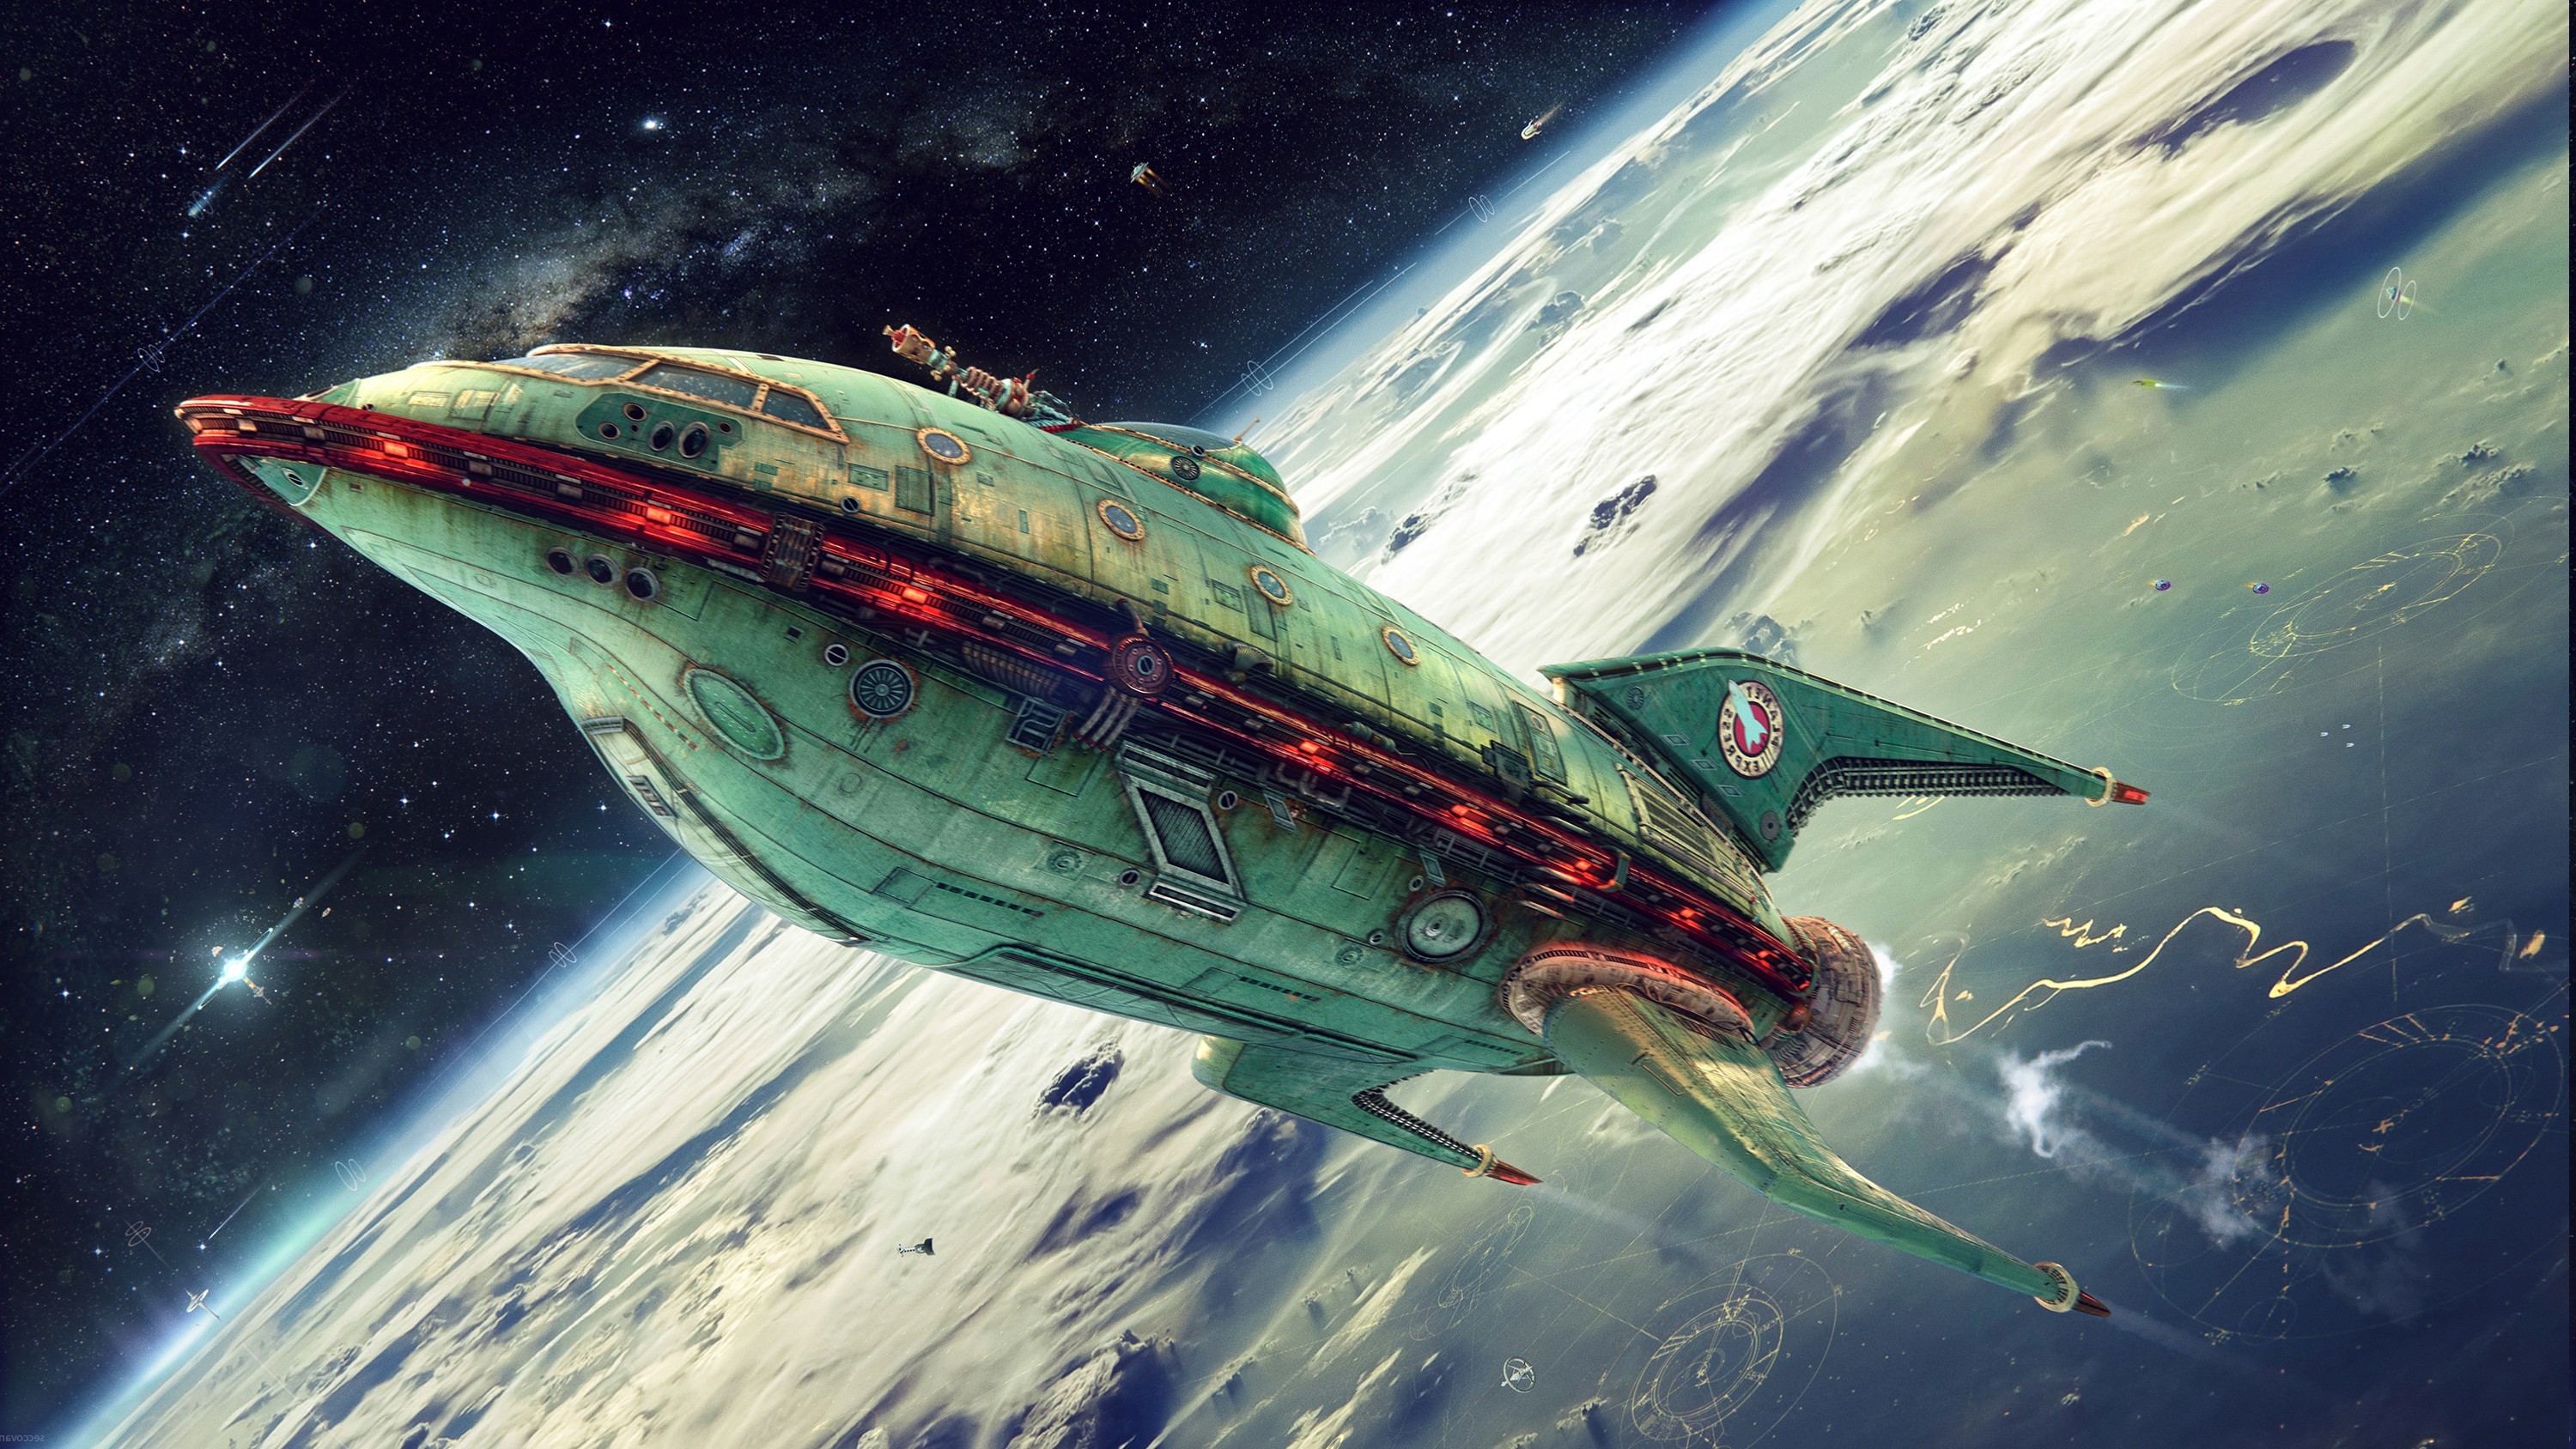 960+ Spaceship HD Wallpapers and Backgrounds